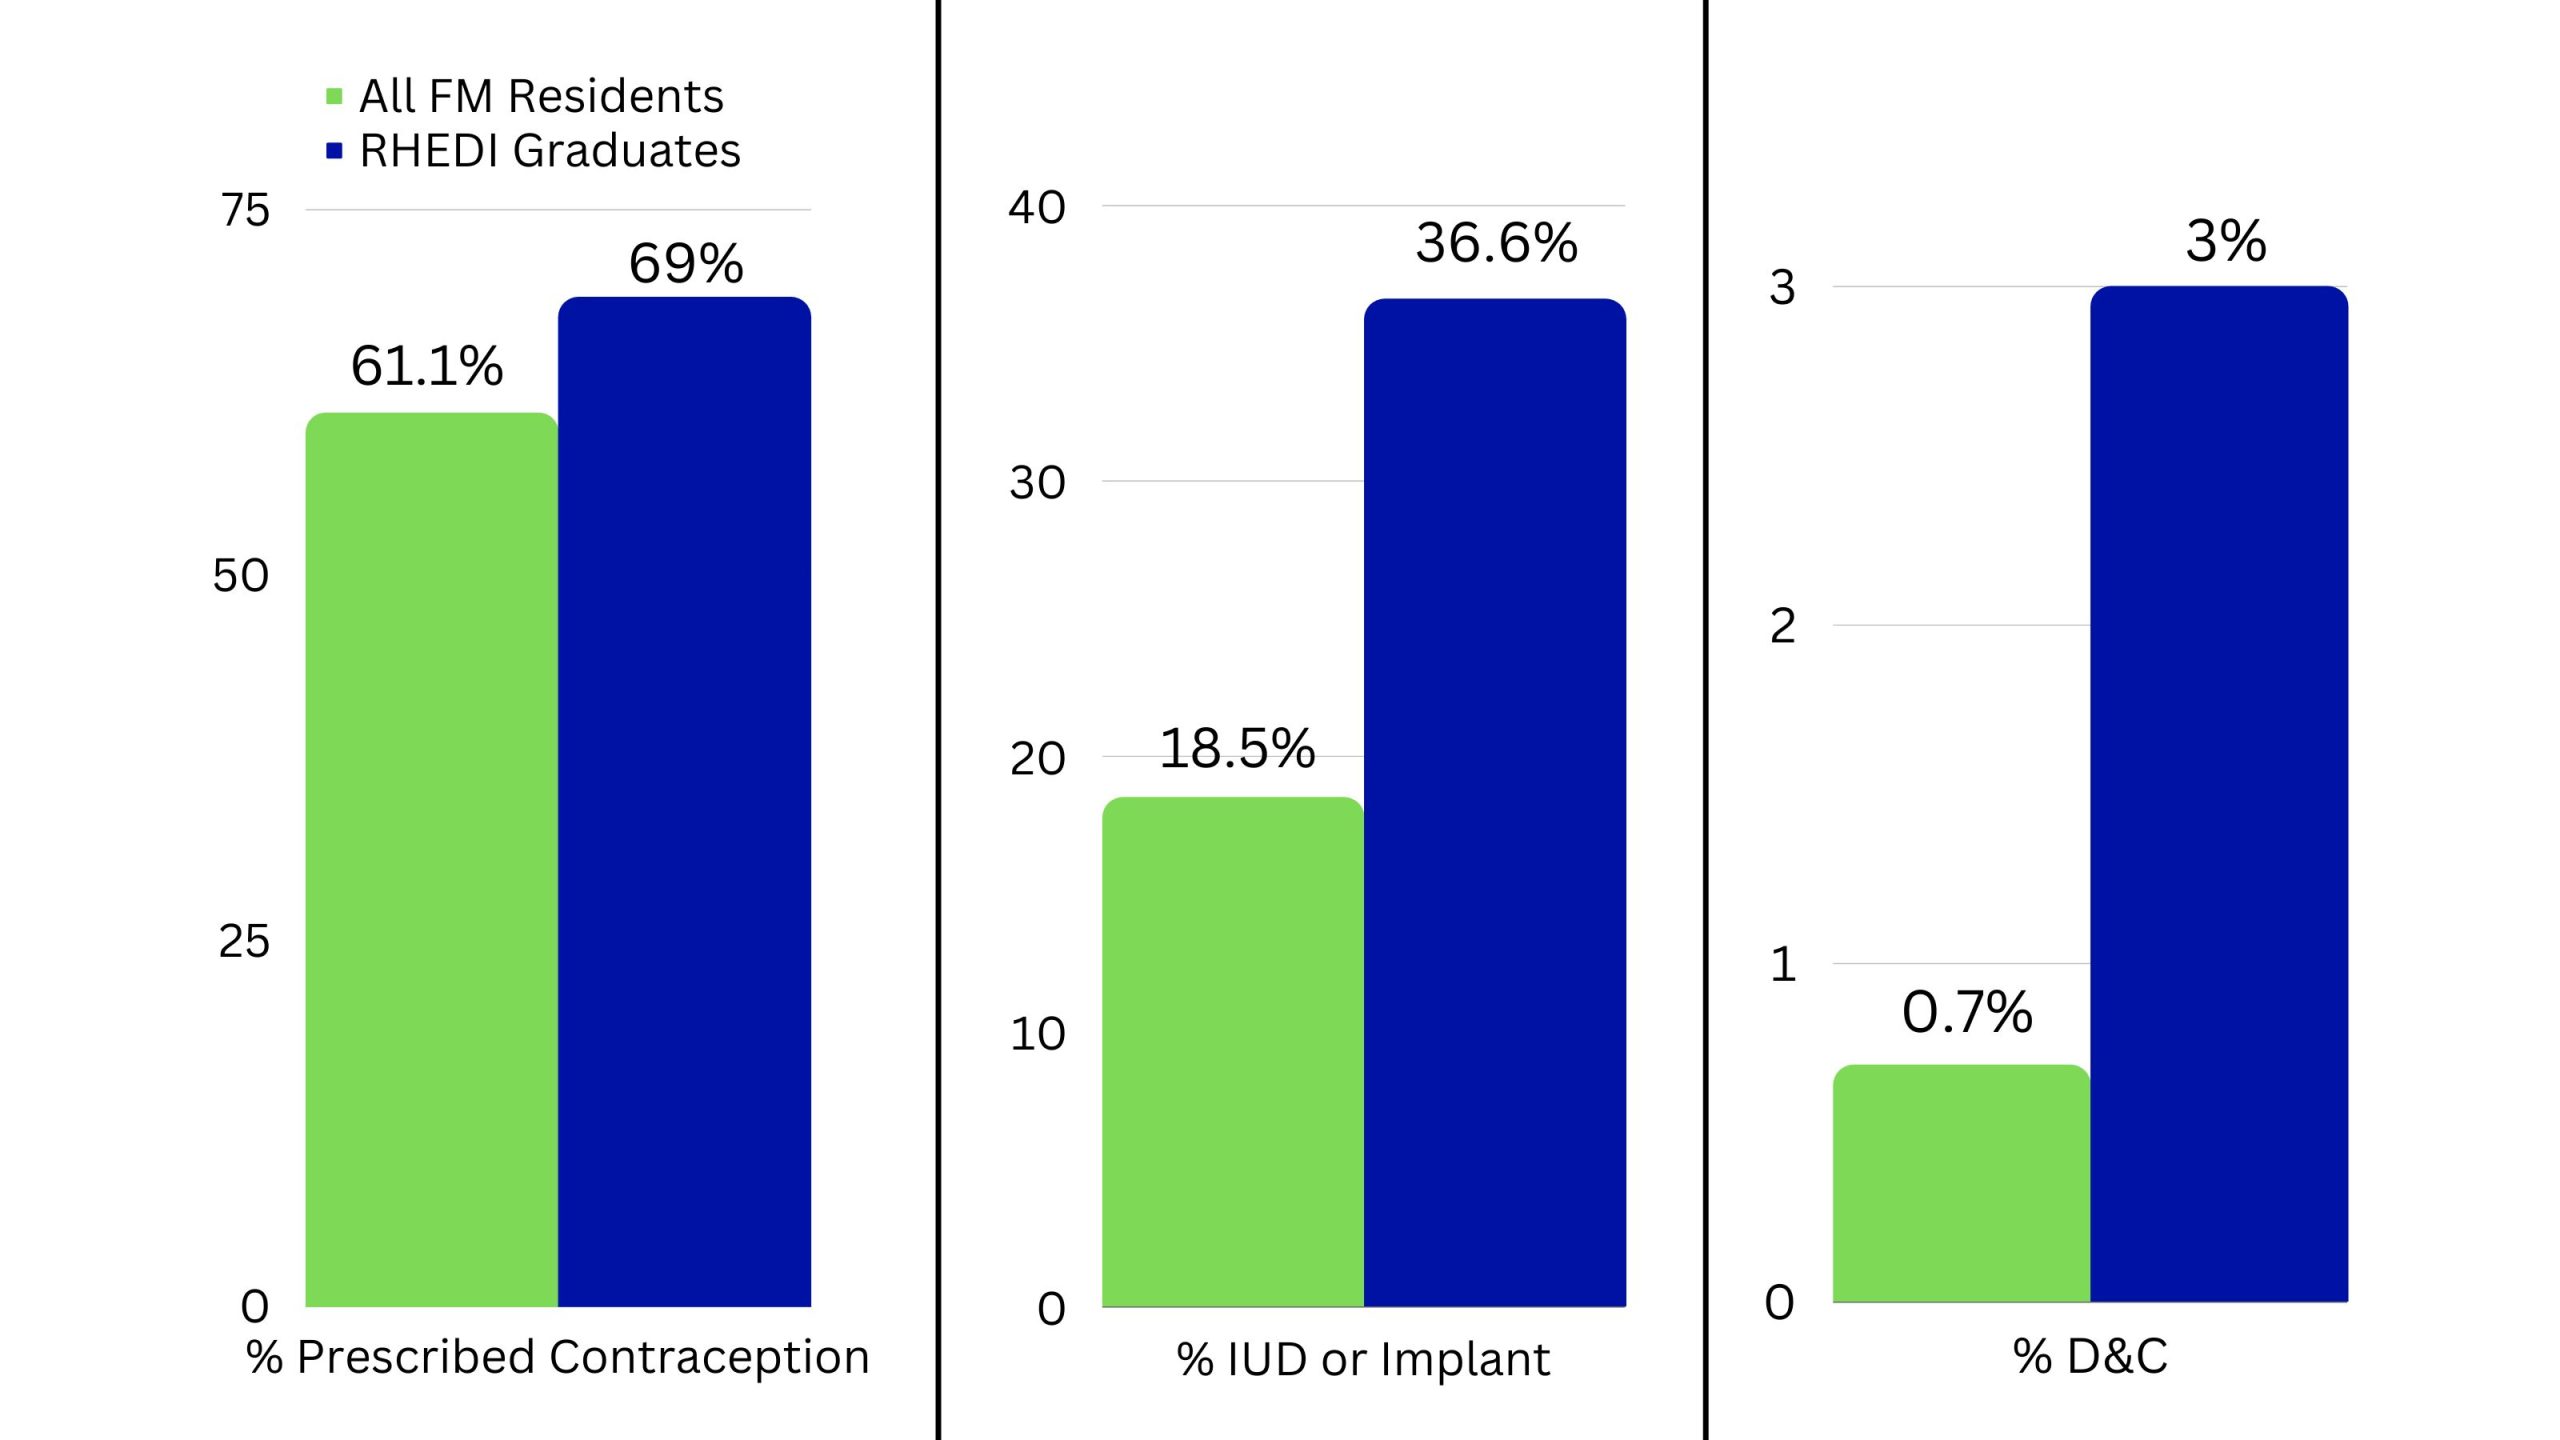 Graphs of services provided by all family residents compared to RHEDI graduates. For % that prescribed contraception, 61.1% compared to 69%; for IUD or implant service, 18.5% vs 36.6%; and for D&C, 0.7% vs 3%.